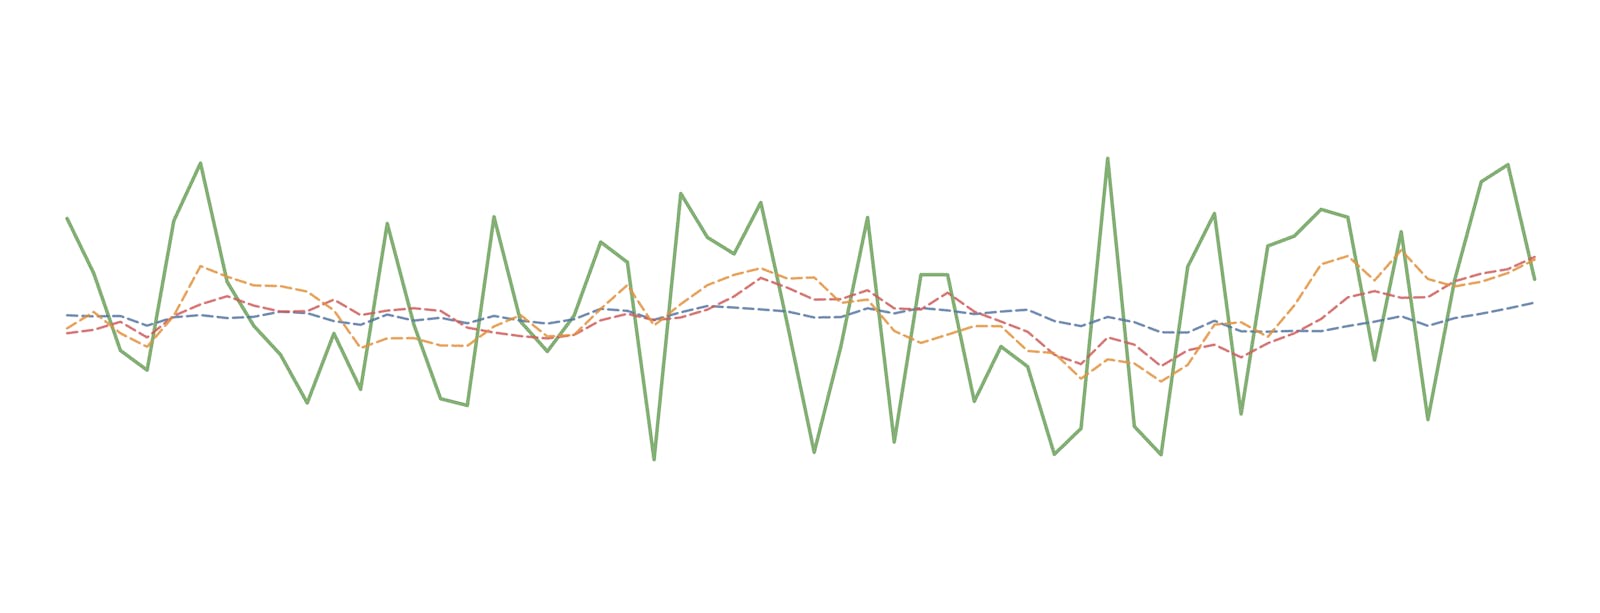 Taming the Wiggles: Unveiling Trends with Simple Moving Averages in BigQuery & Tableau